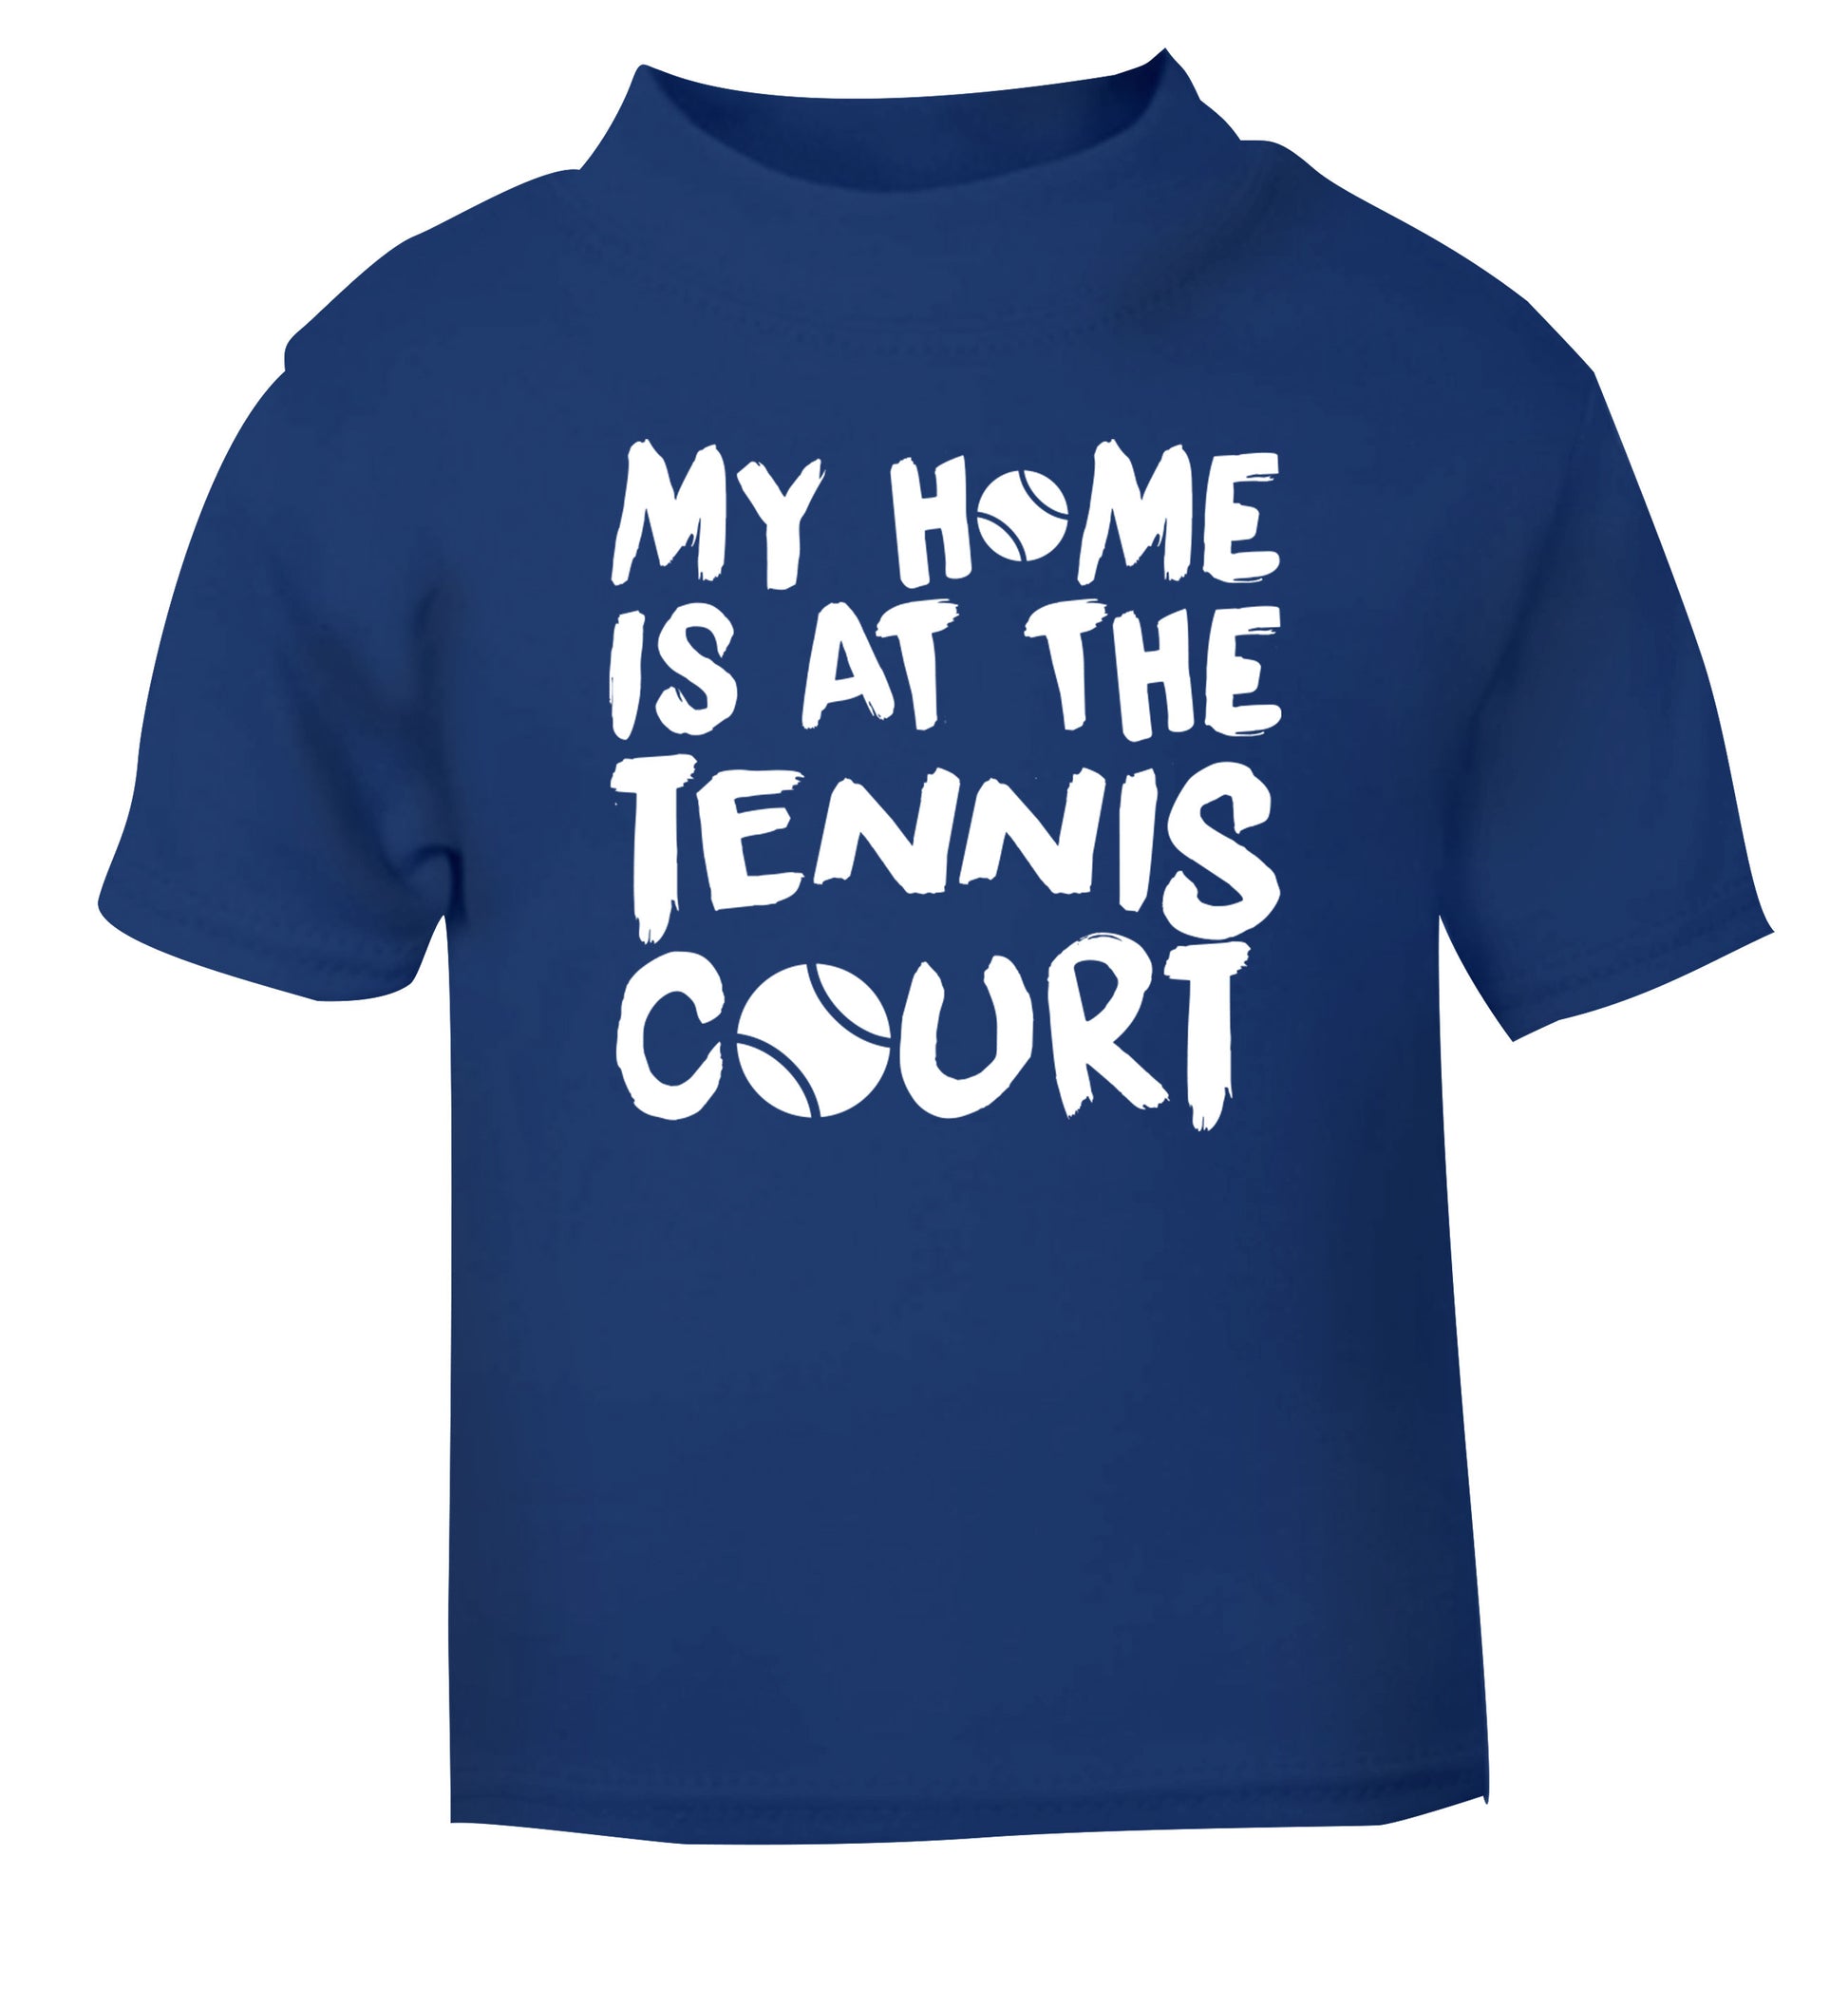 My home is at the tennis court blue Baby Toddler Tshirt 2 Years